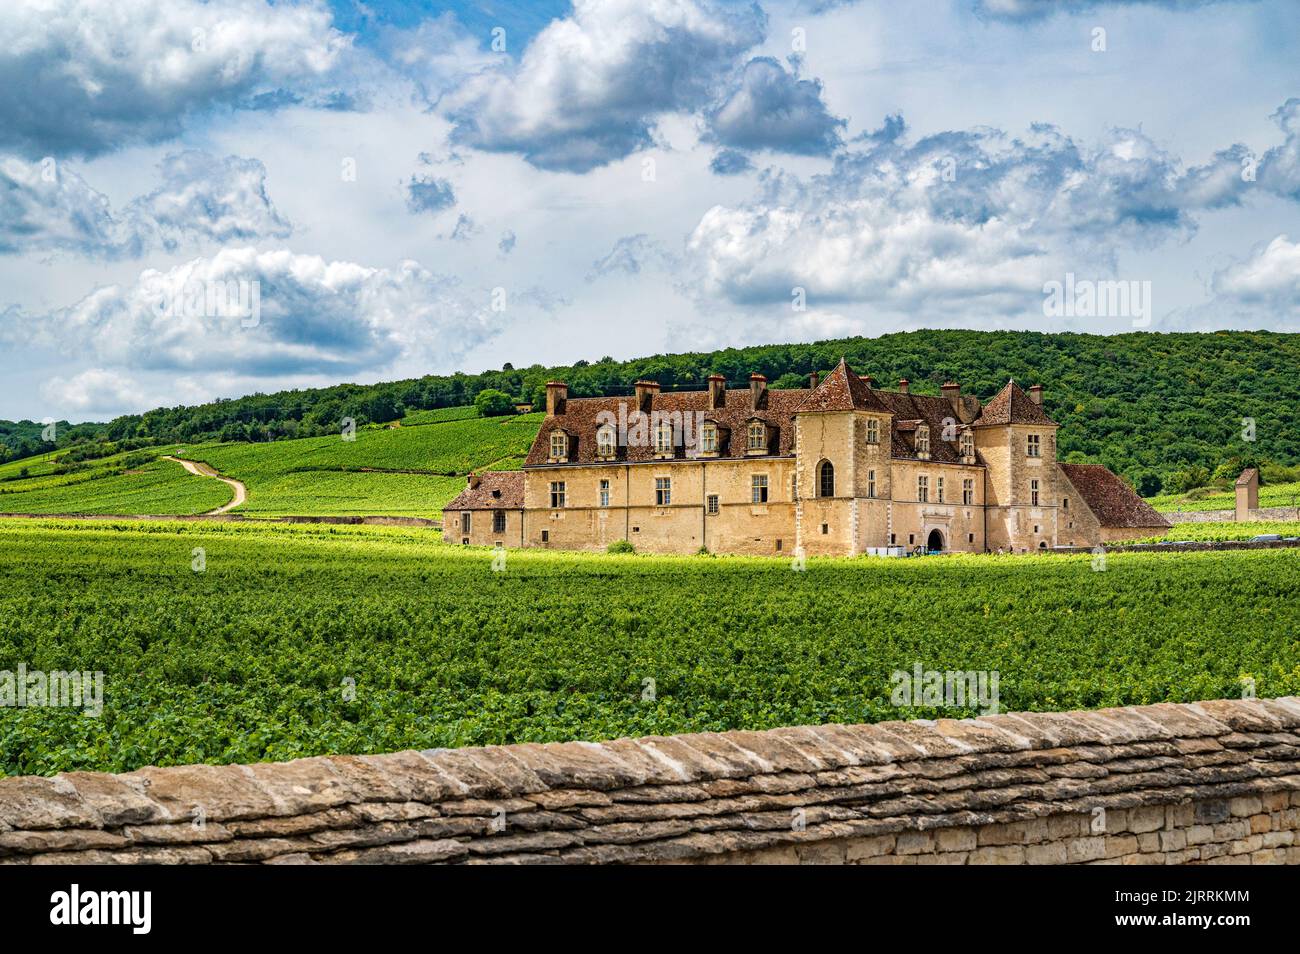 The formerly Cistercensian winery Clos de Vougeot is one of the most renowned wineries in Burgundy, France Stock Photo